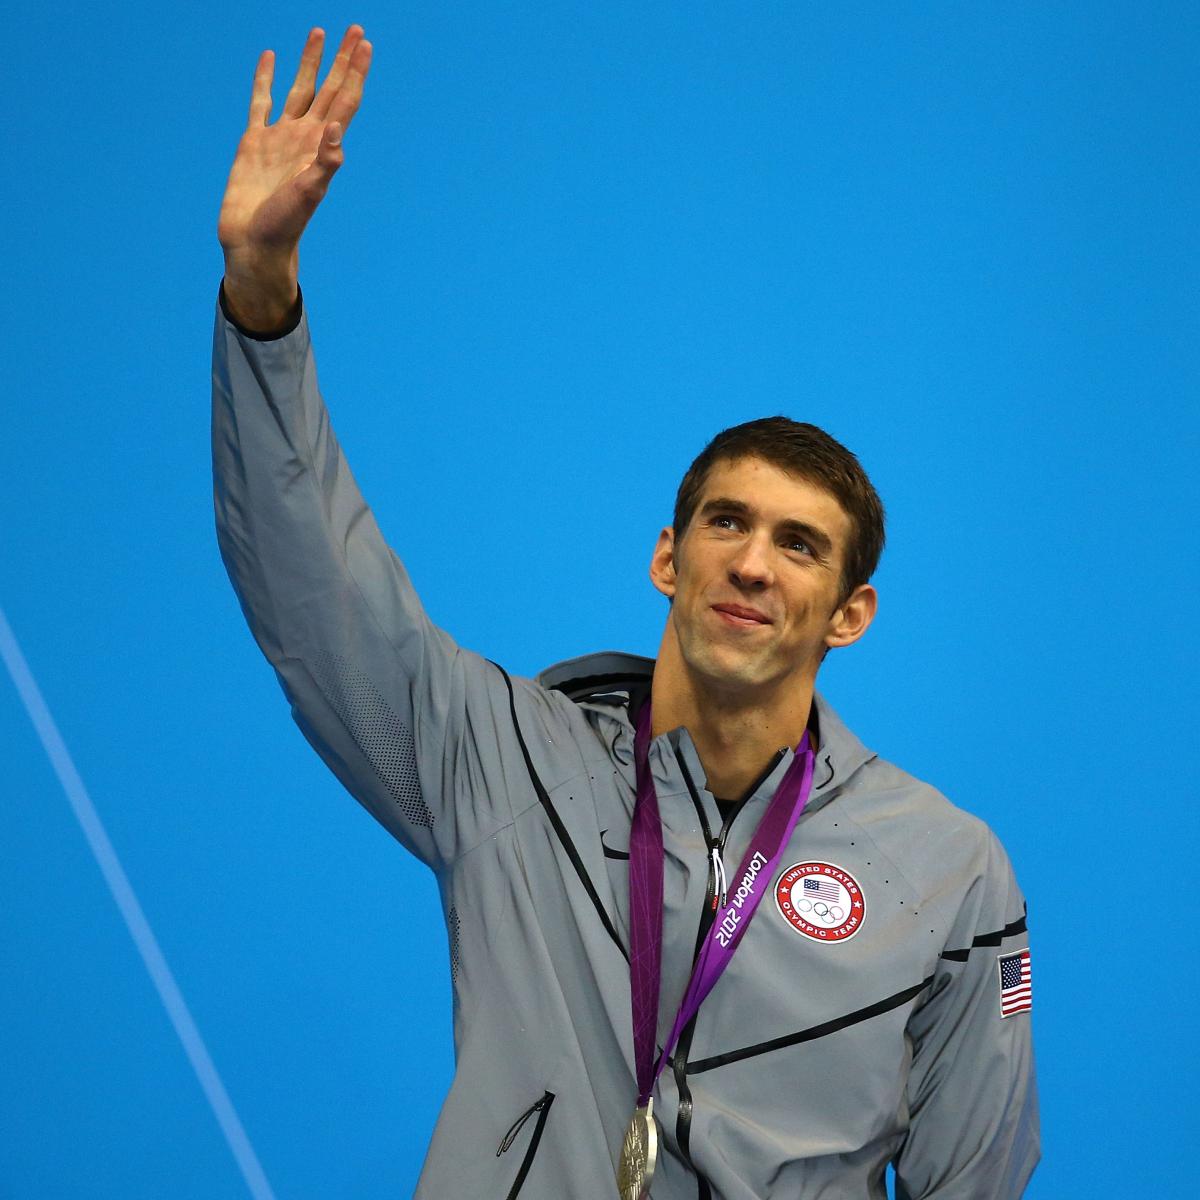 Michael Phelps and the Top Olympics Medal Winners of All Time